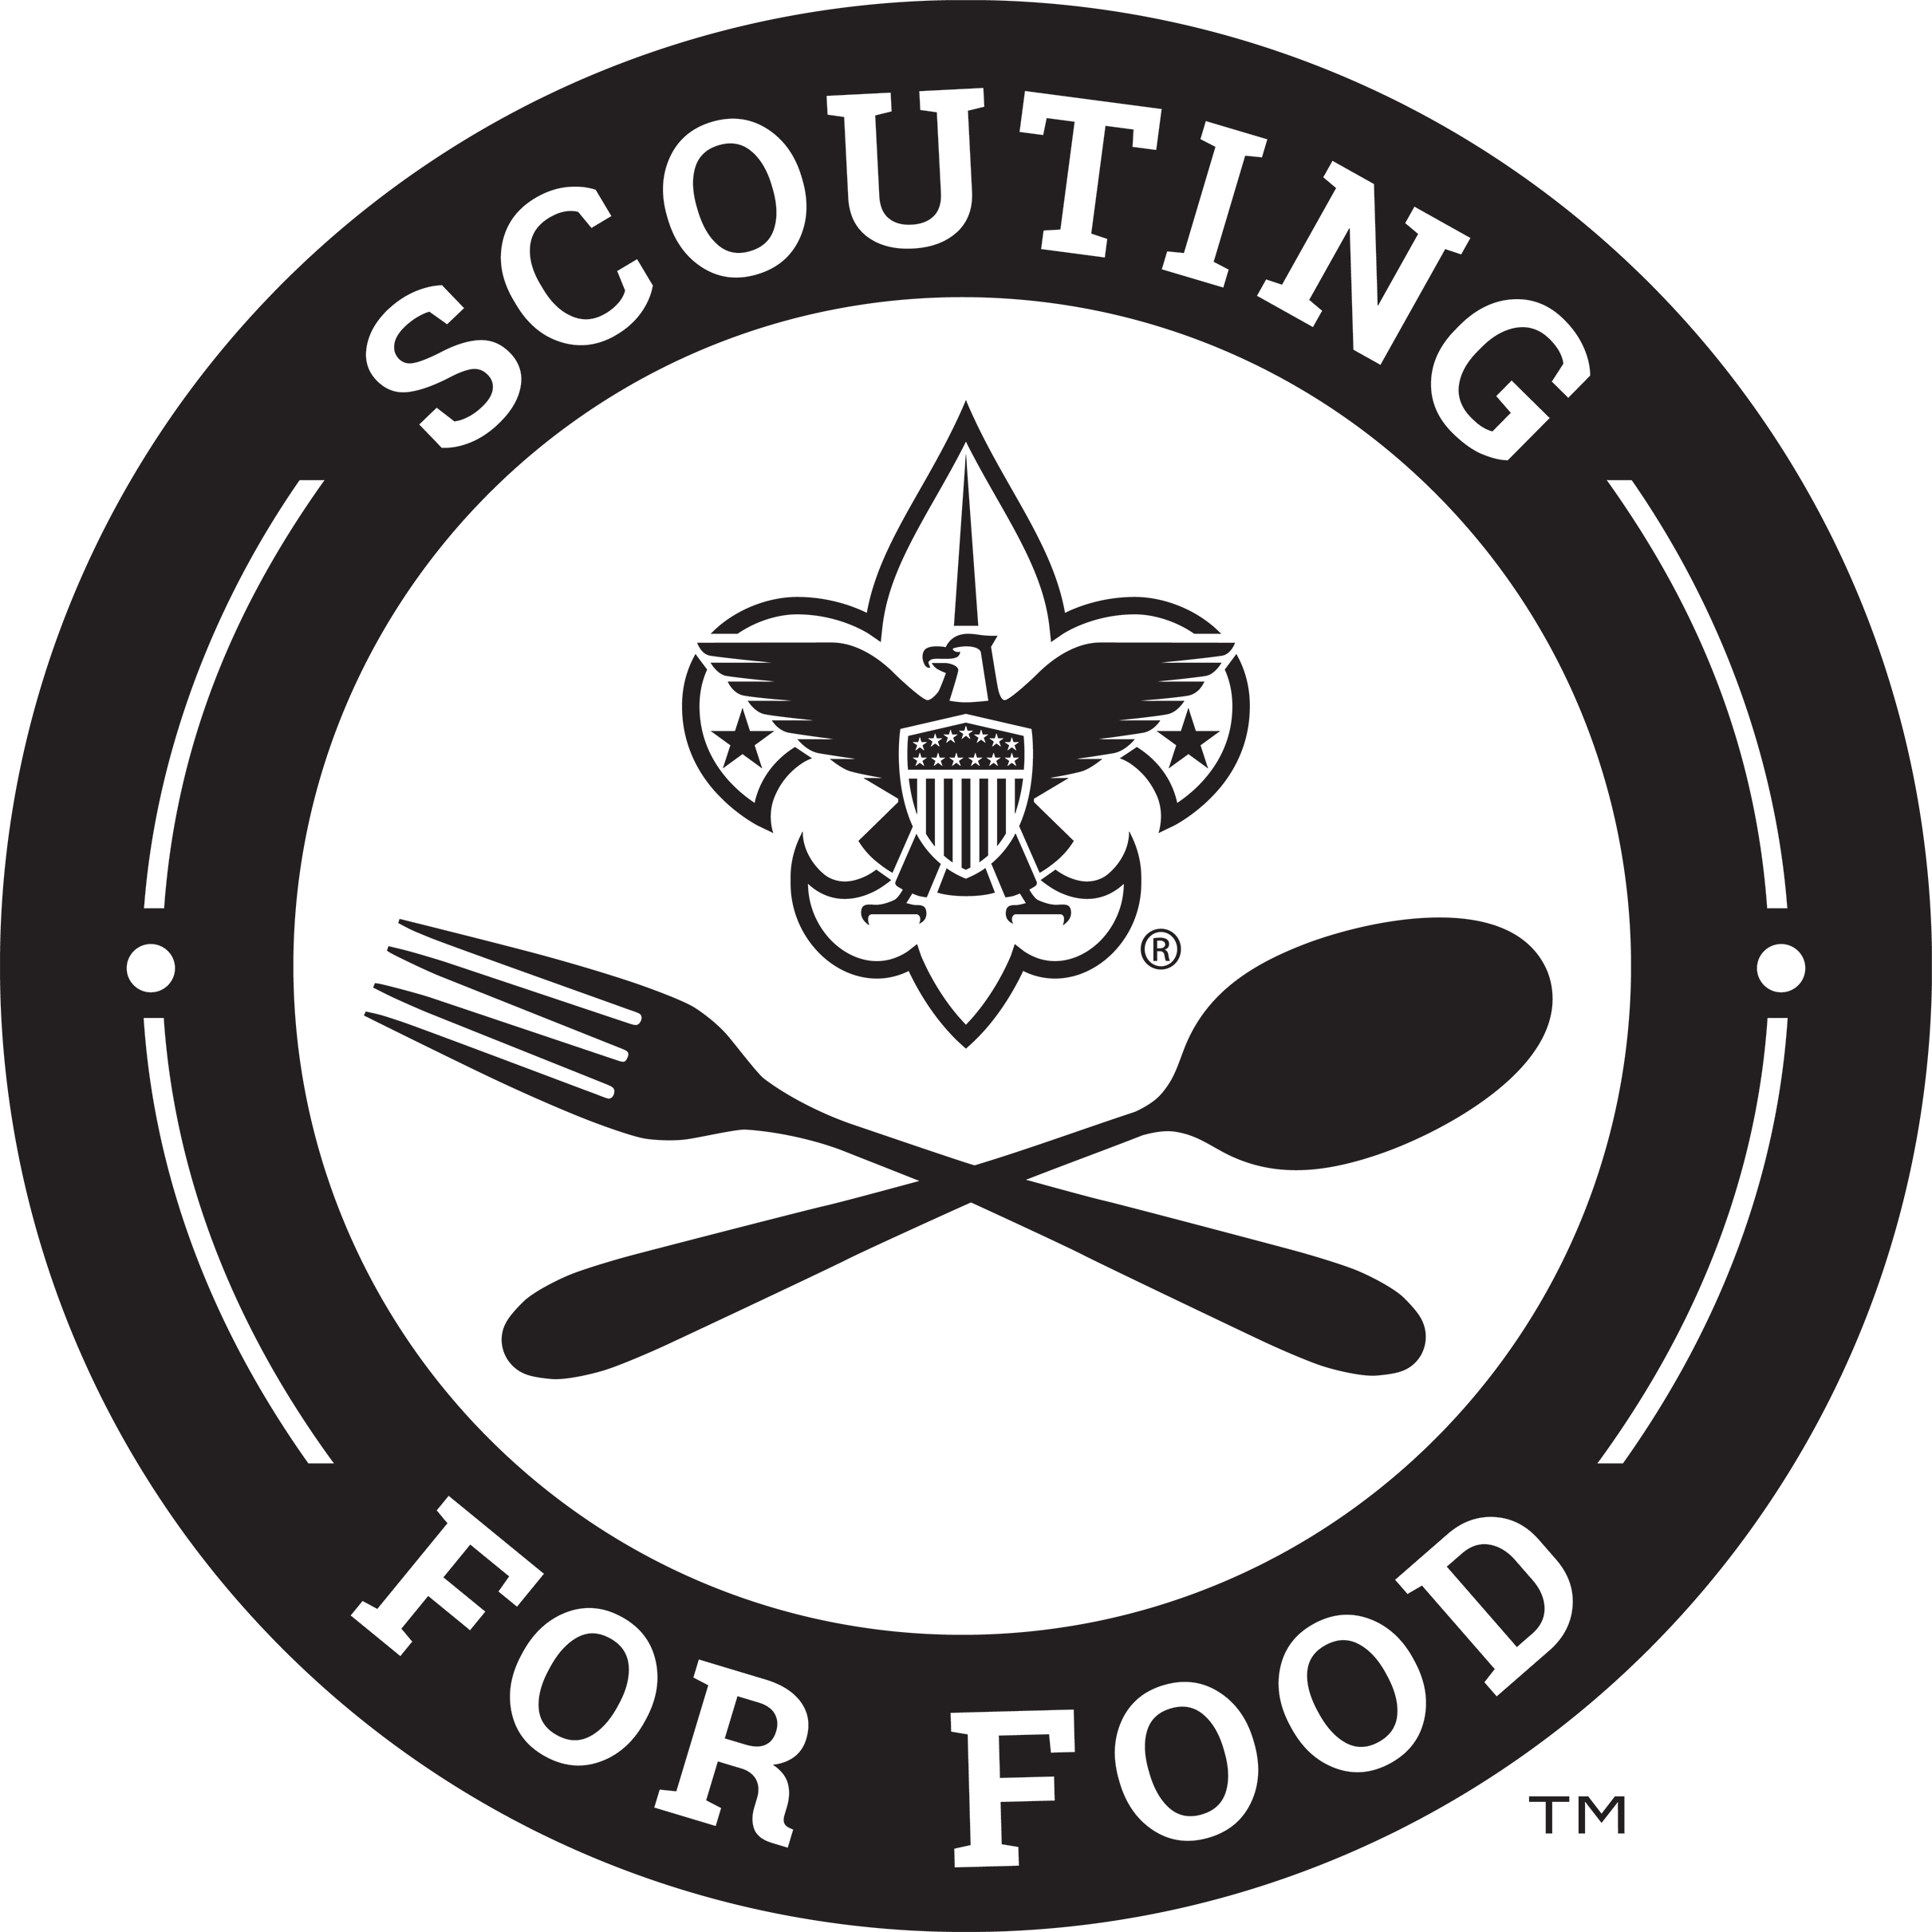 Scouting For Food